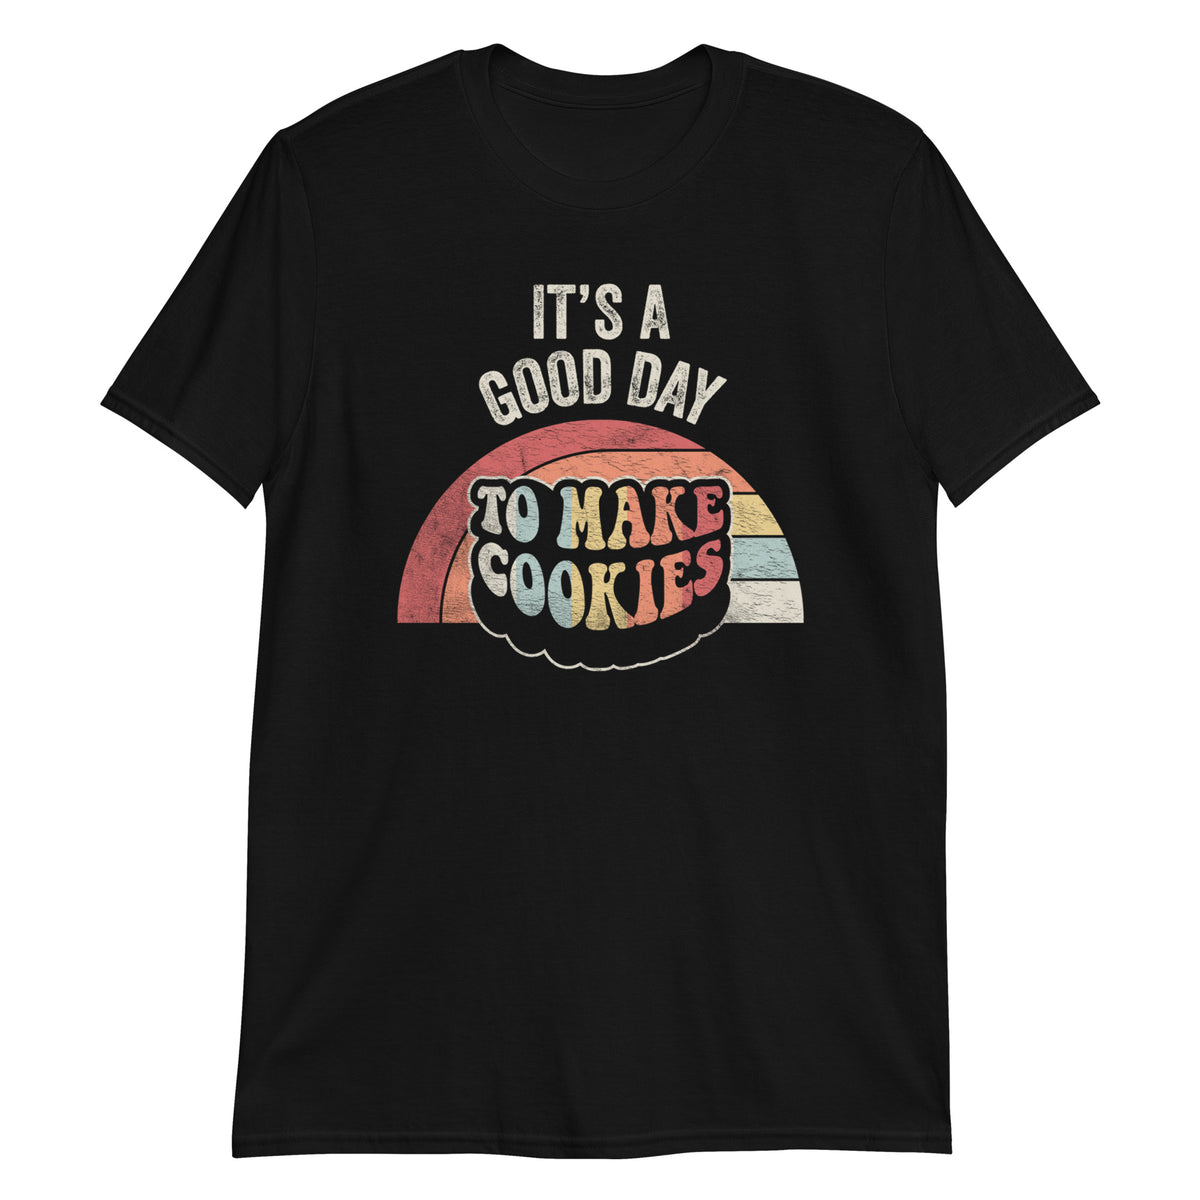 It's a Good Day to Make Cookies T-Shirt